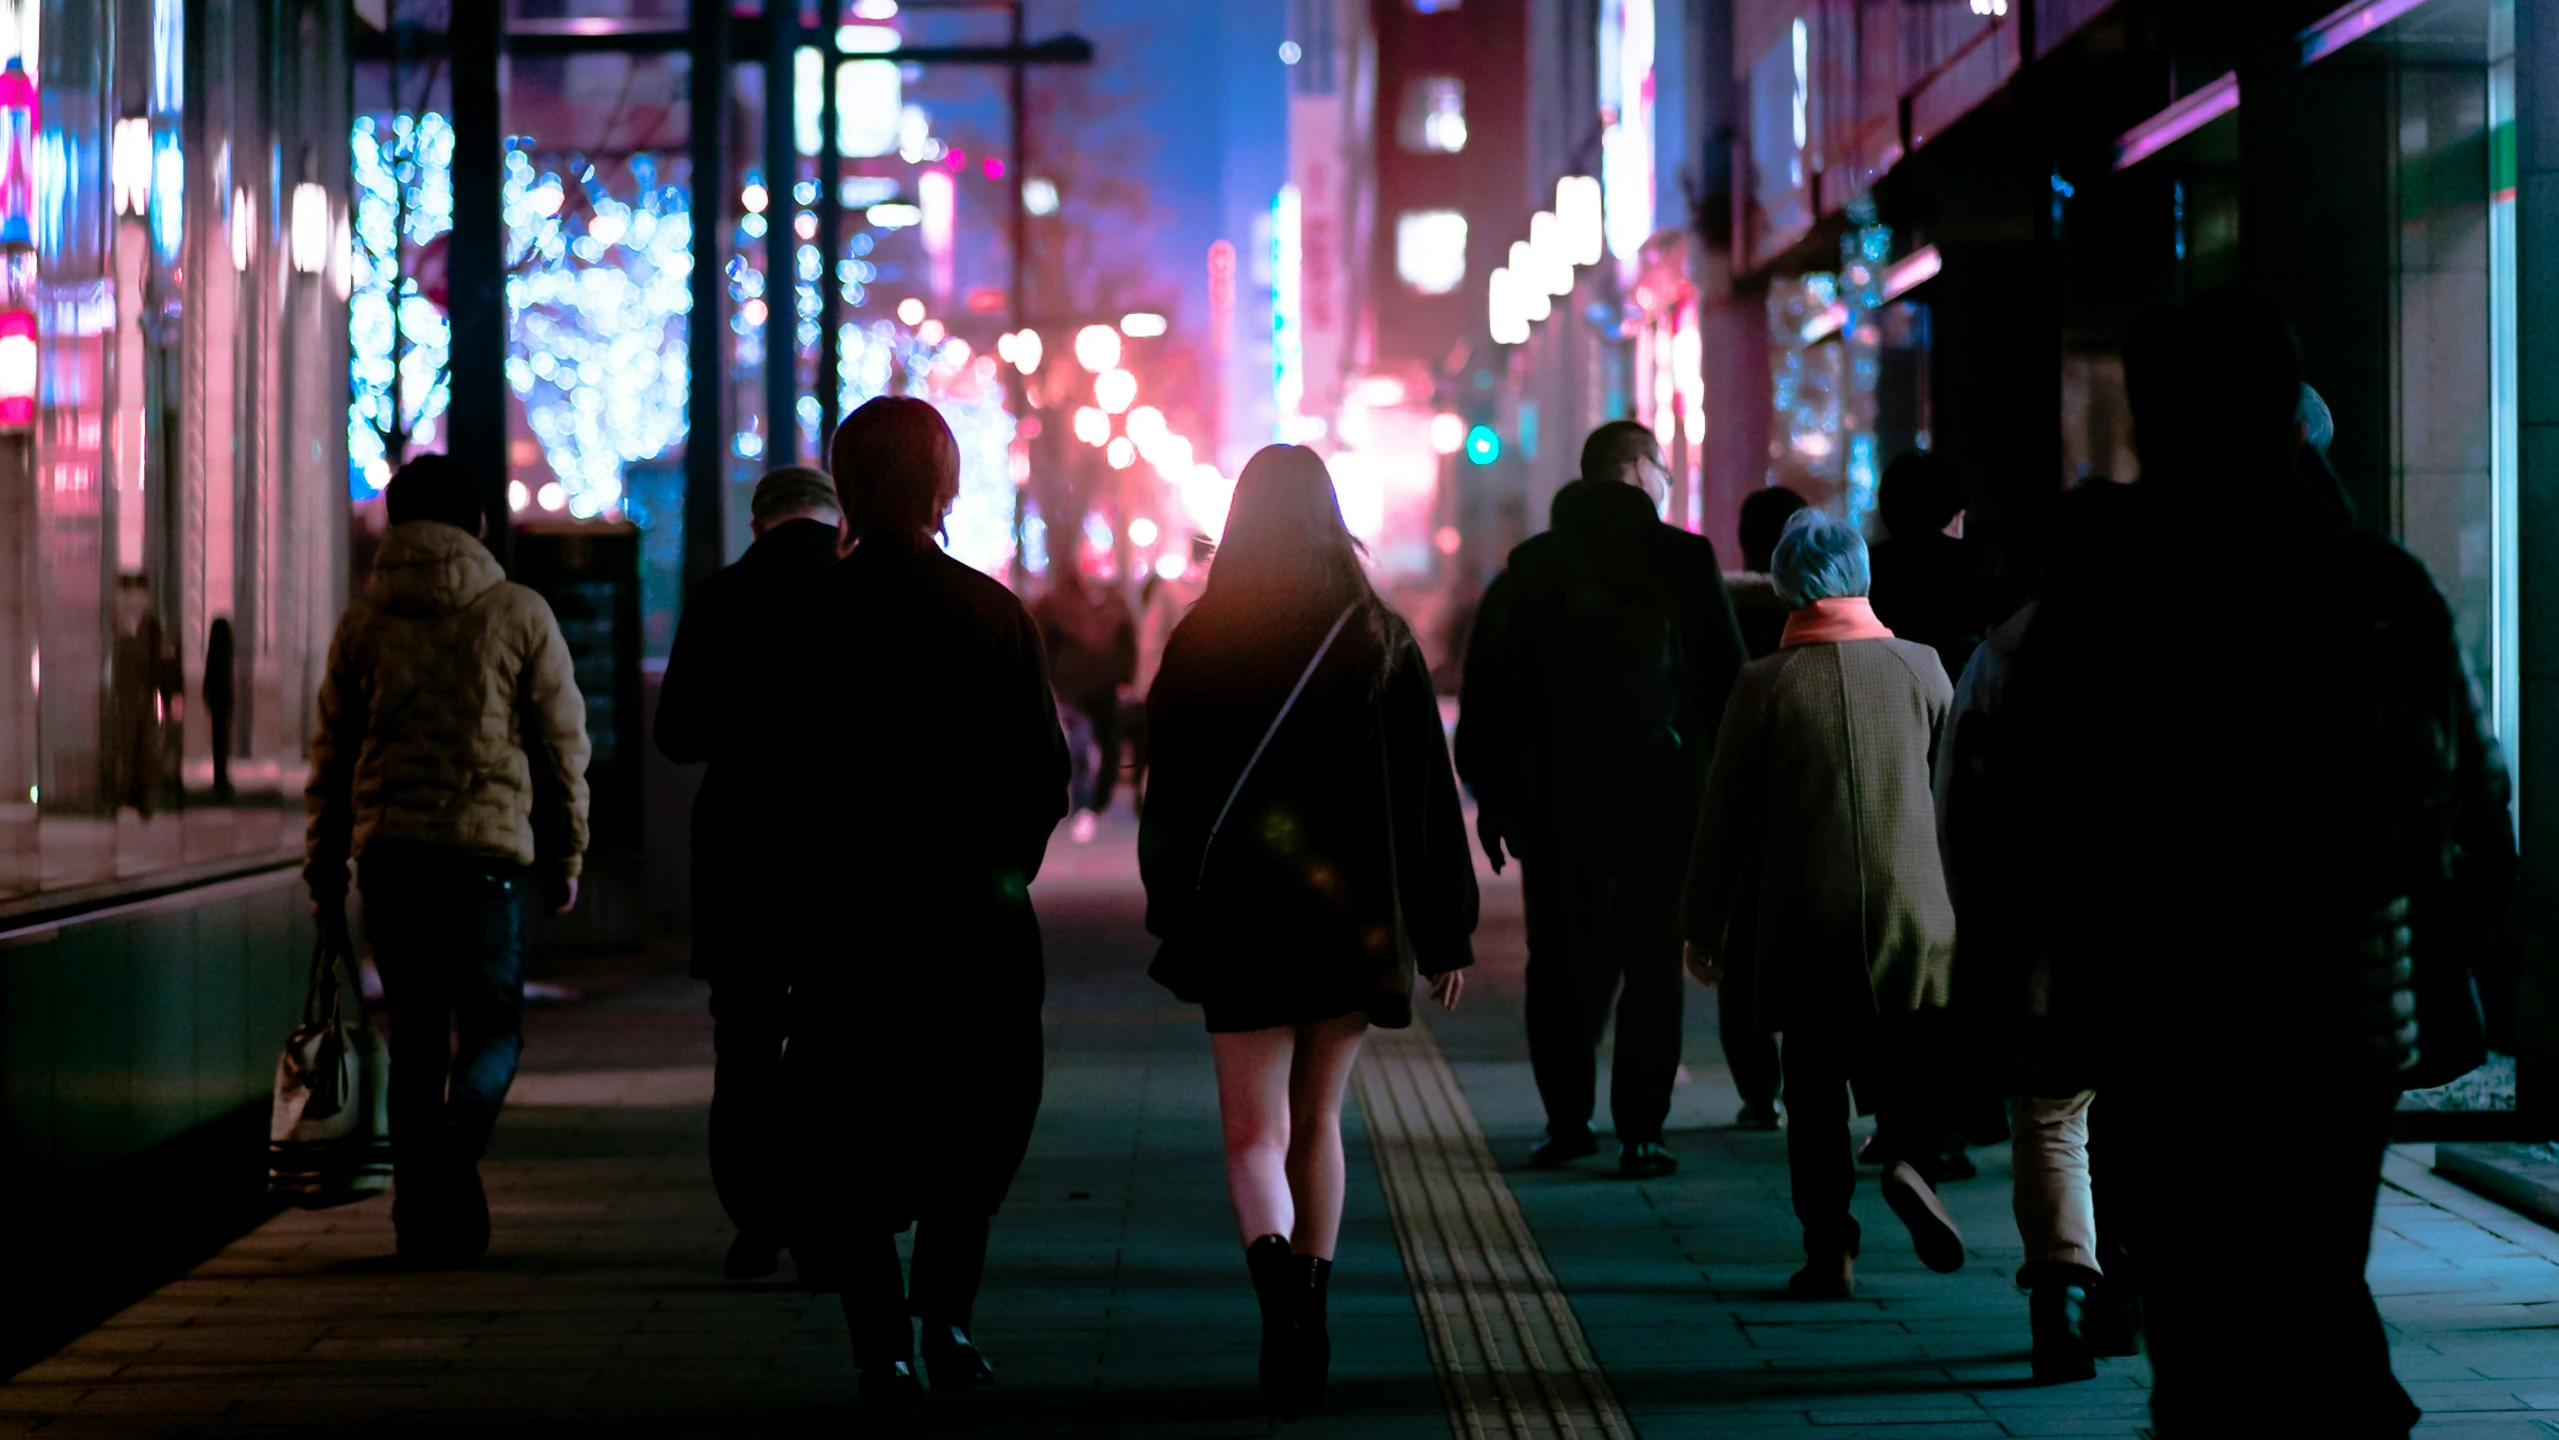 silhouettes of several people walking down a city sidewalk